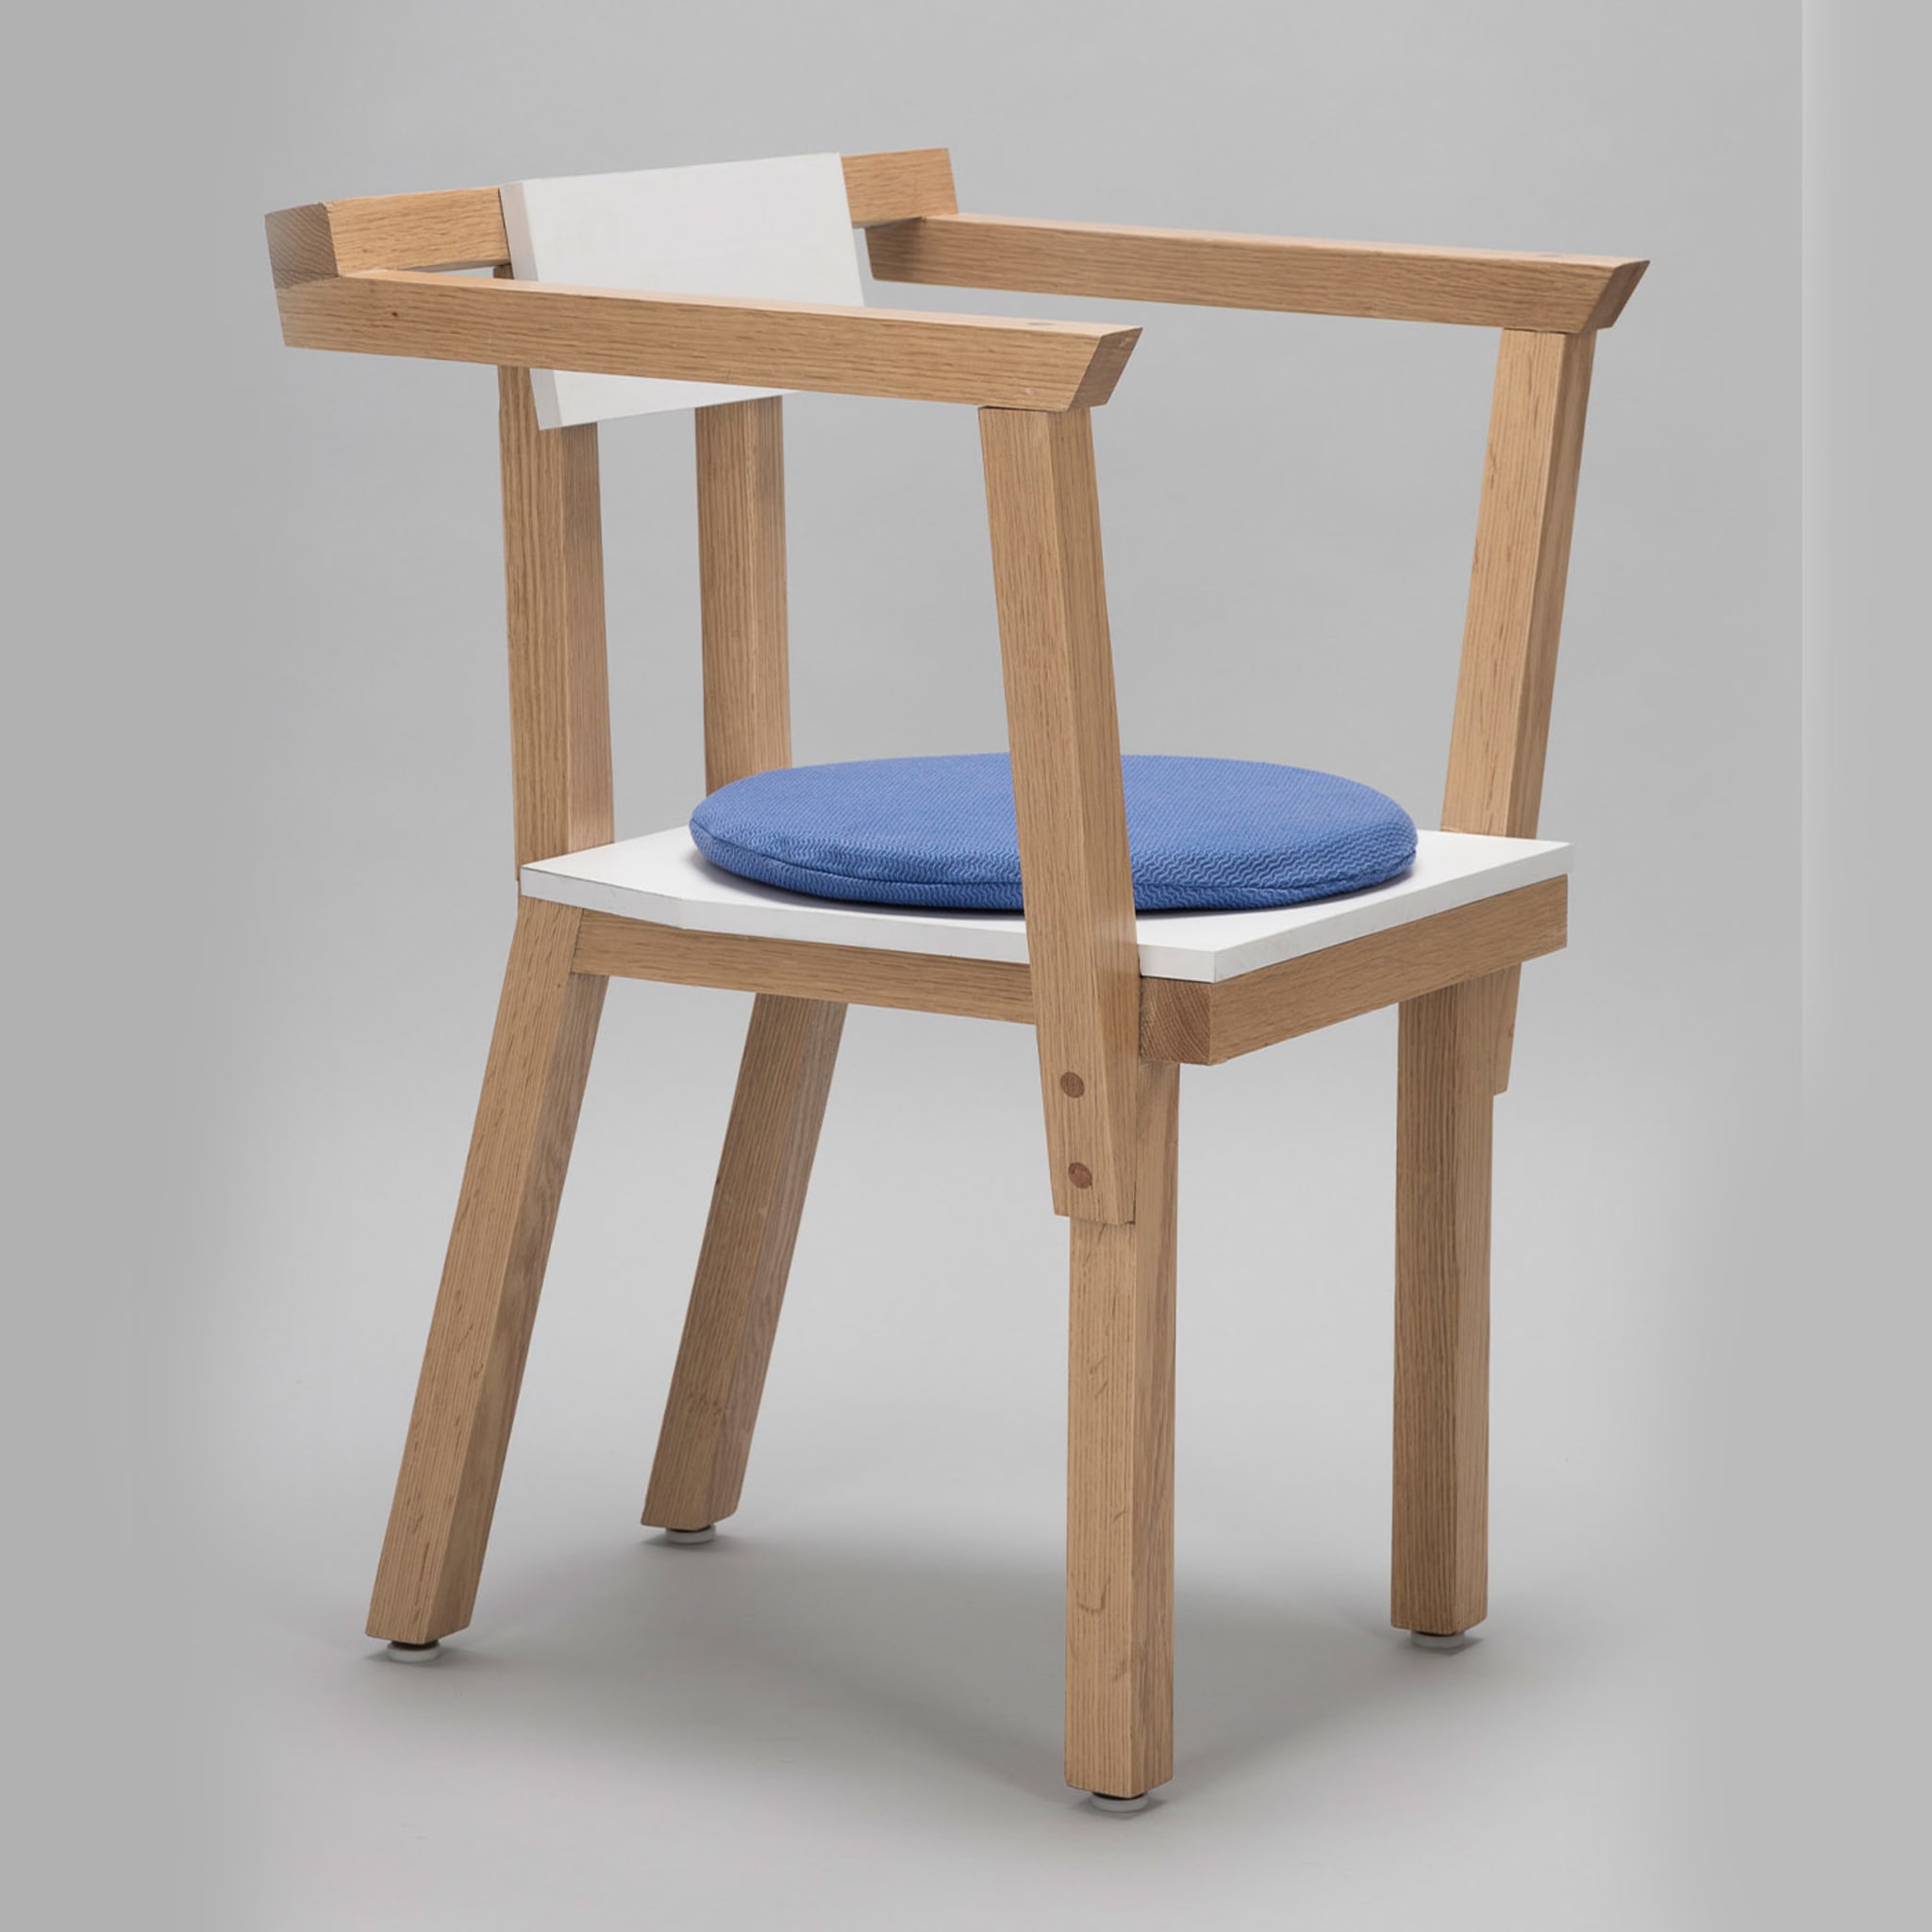 Kaspa Blanca Chair With Arms By Clemence Seilles - Alternative view 1